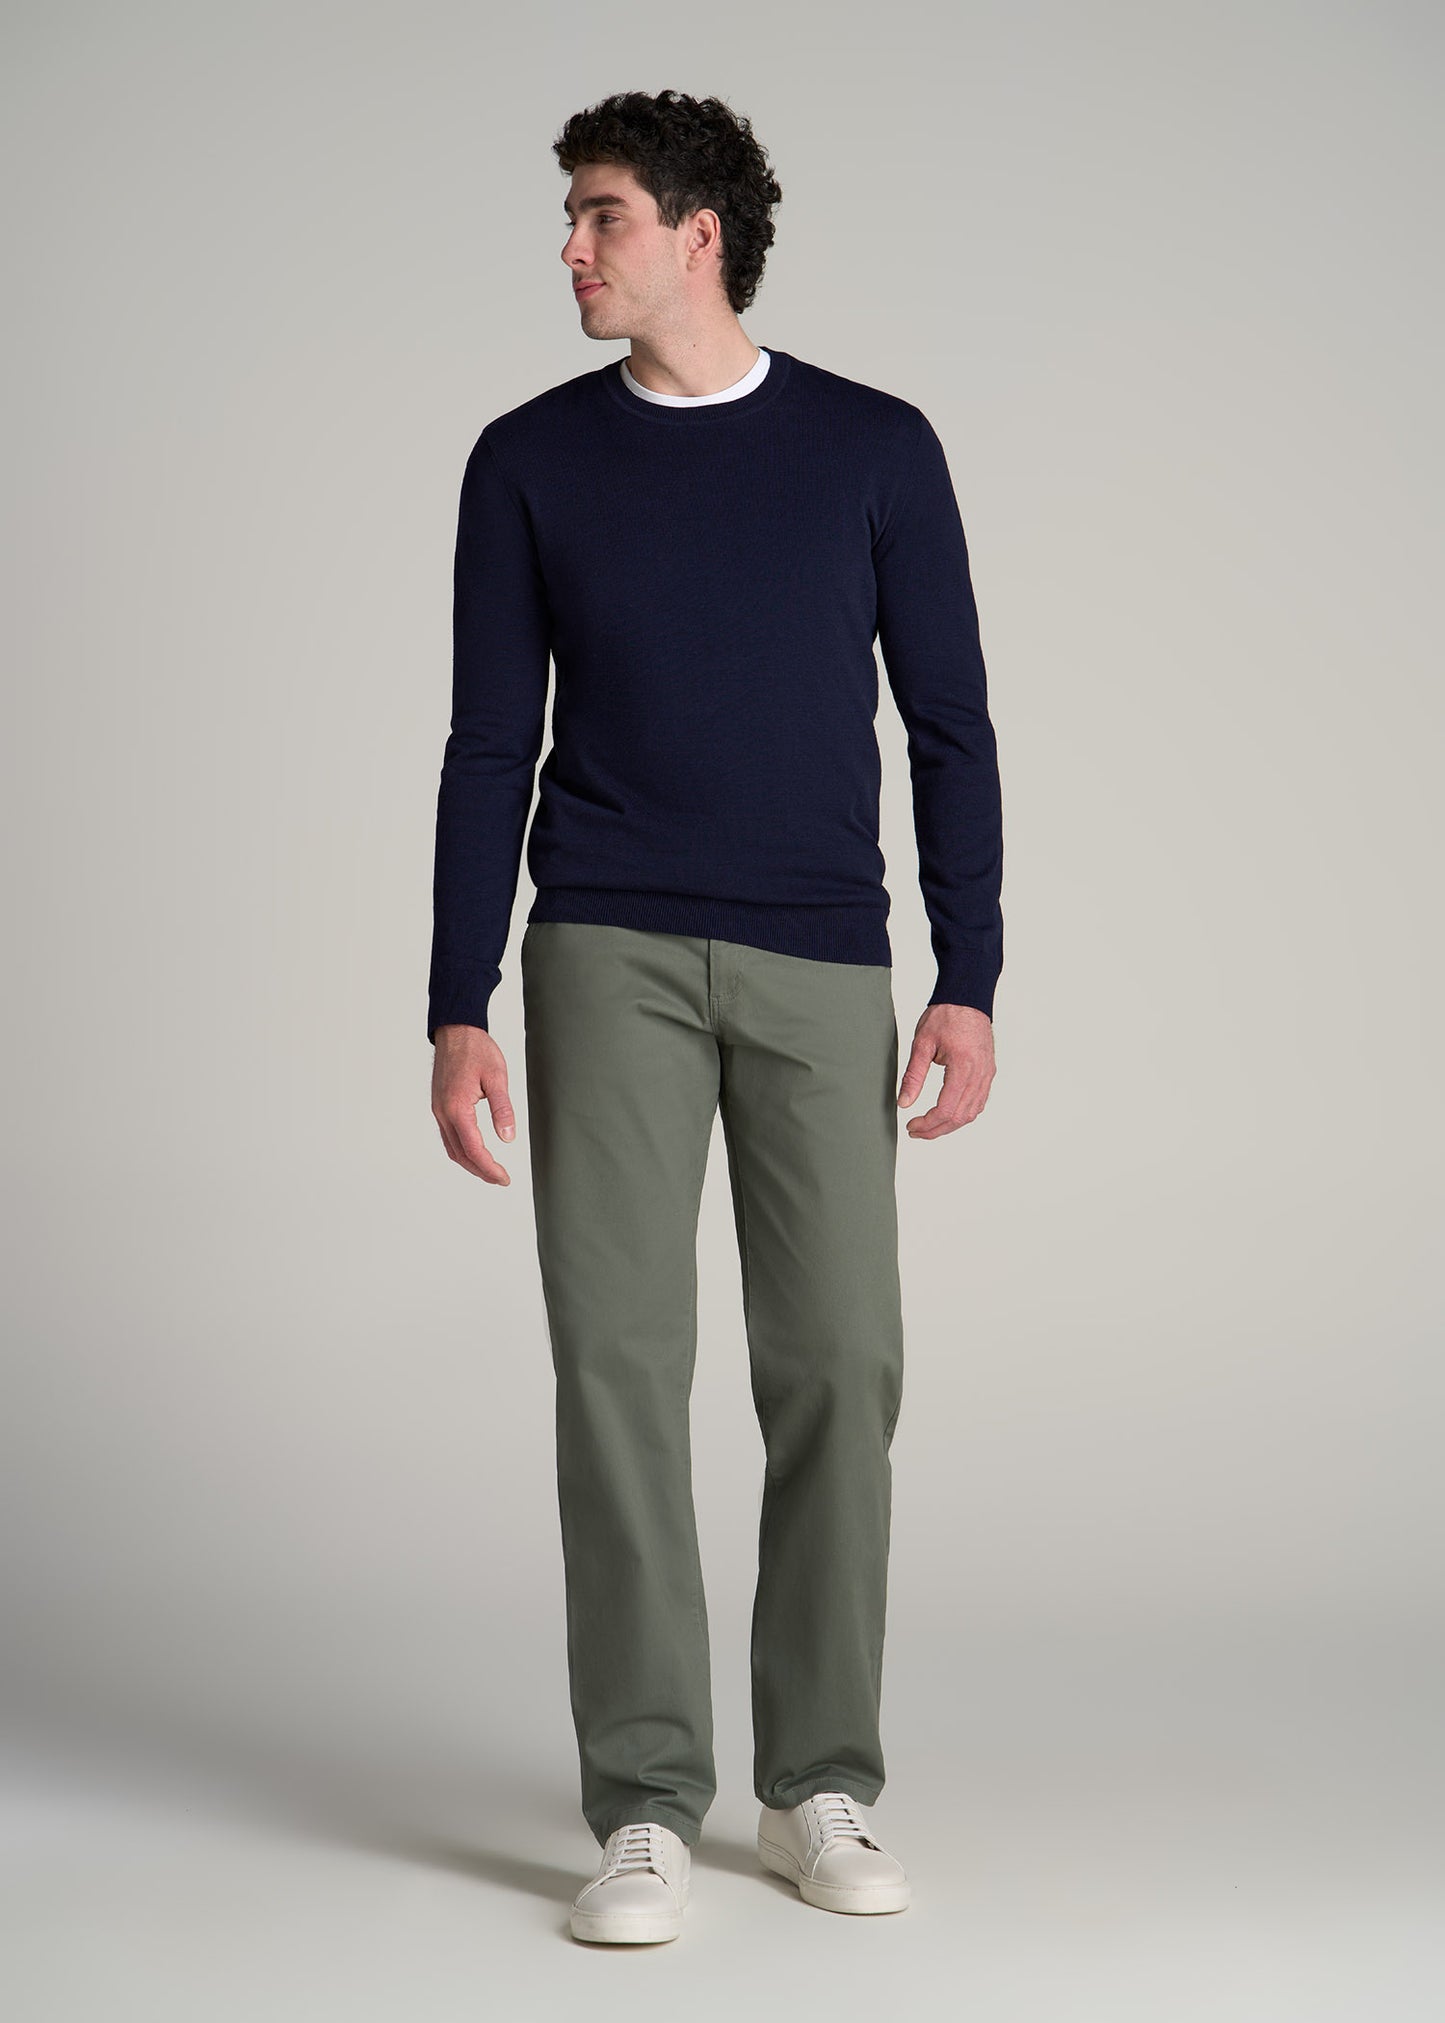 Mason RELAXED Chinos in Wreath Green - Pants for Tall Men